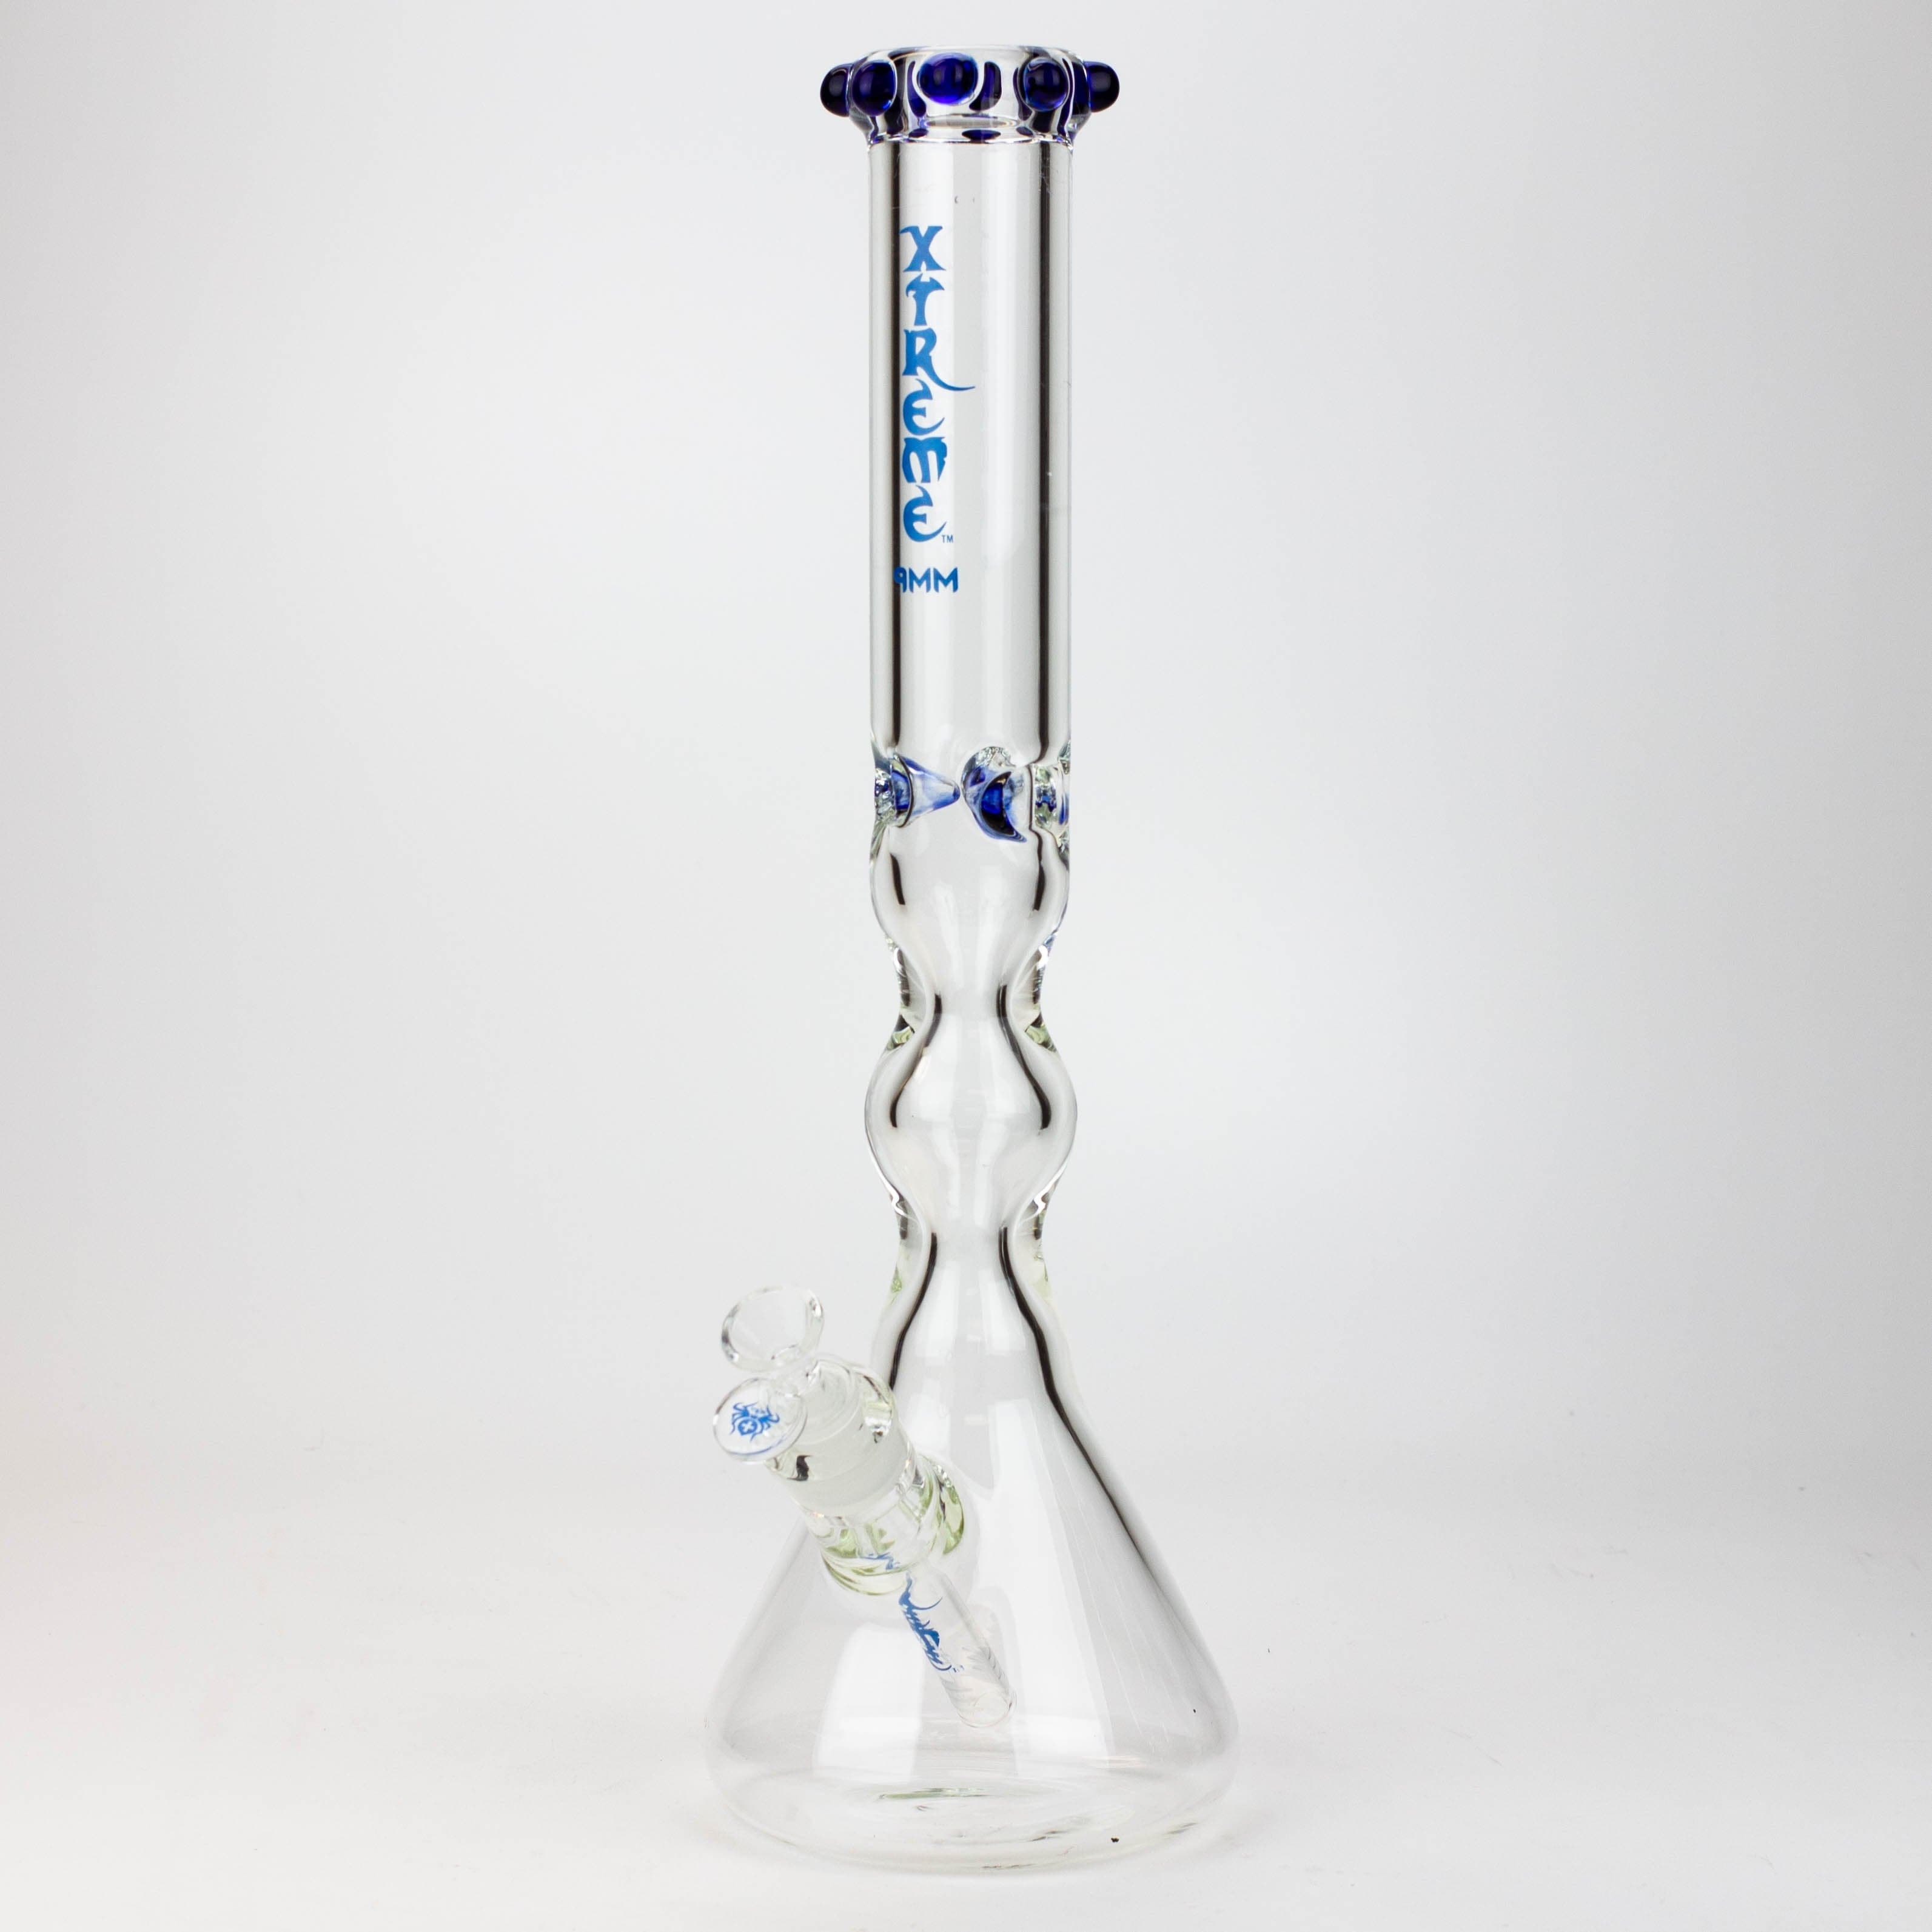 Xtreme curved tube glass water pipes_5